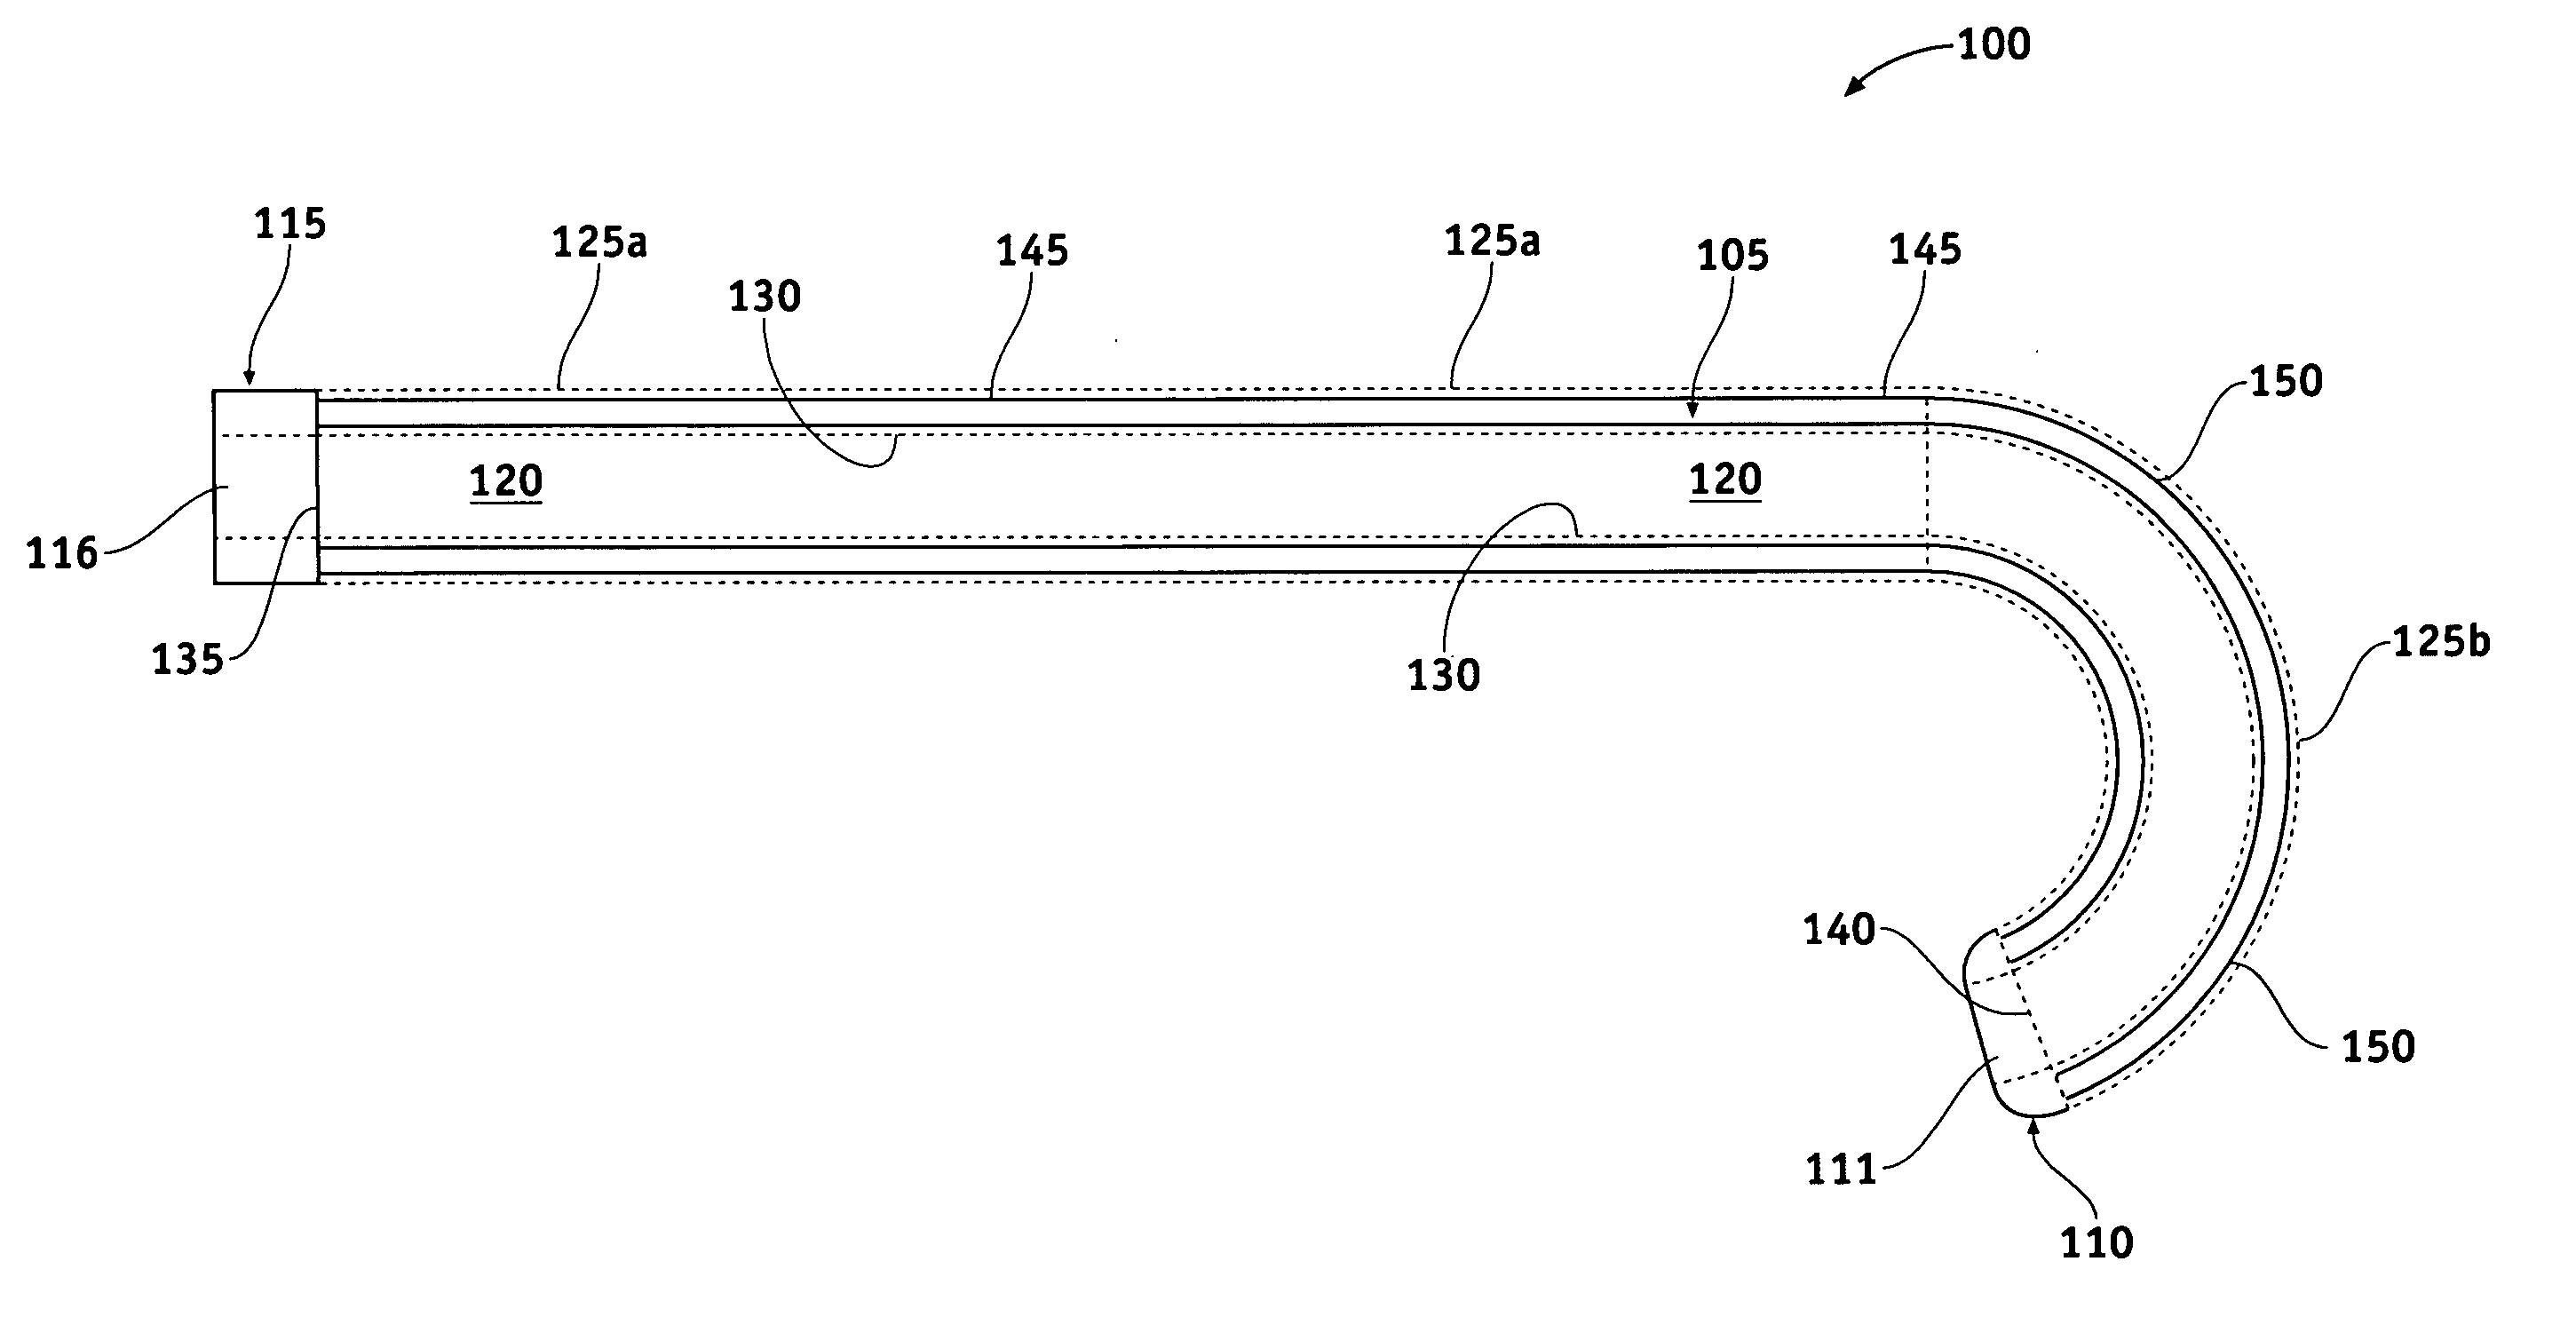 Curved catheter comprising a solid-walled metal tube with varying stiffness